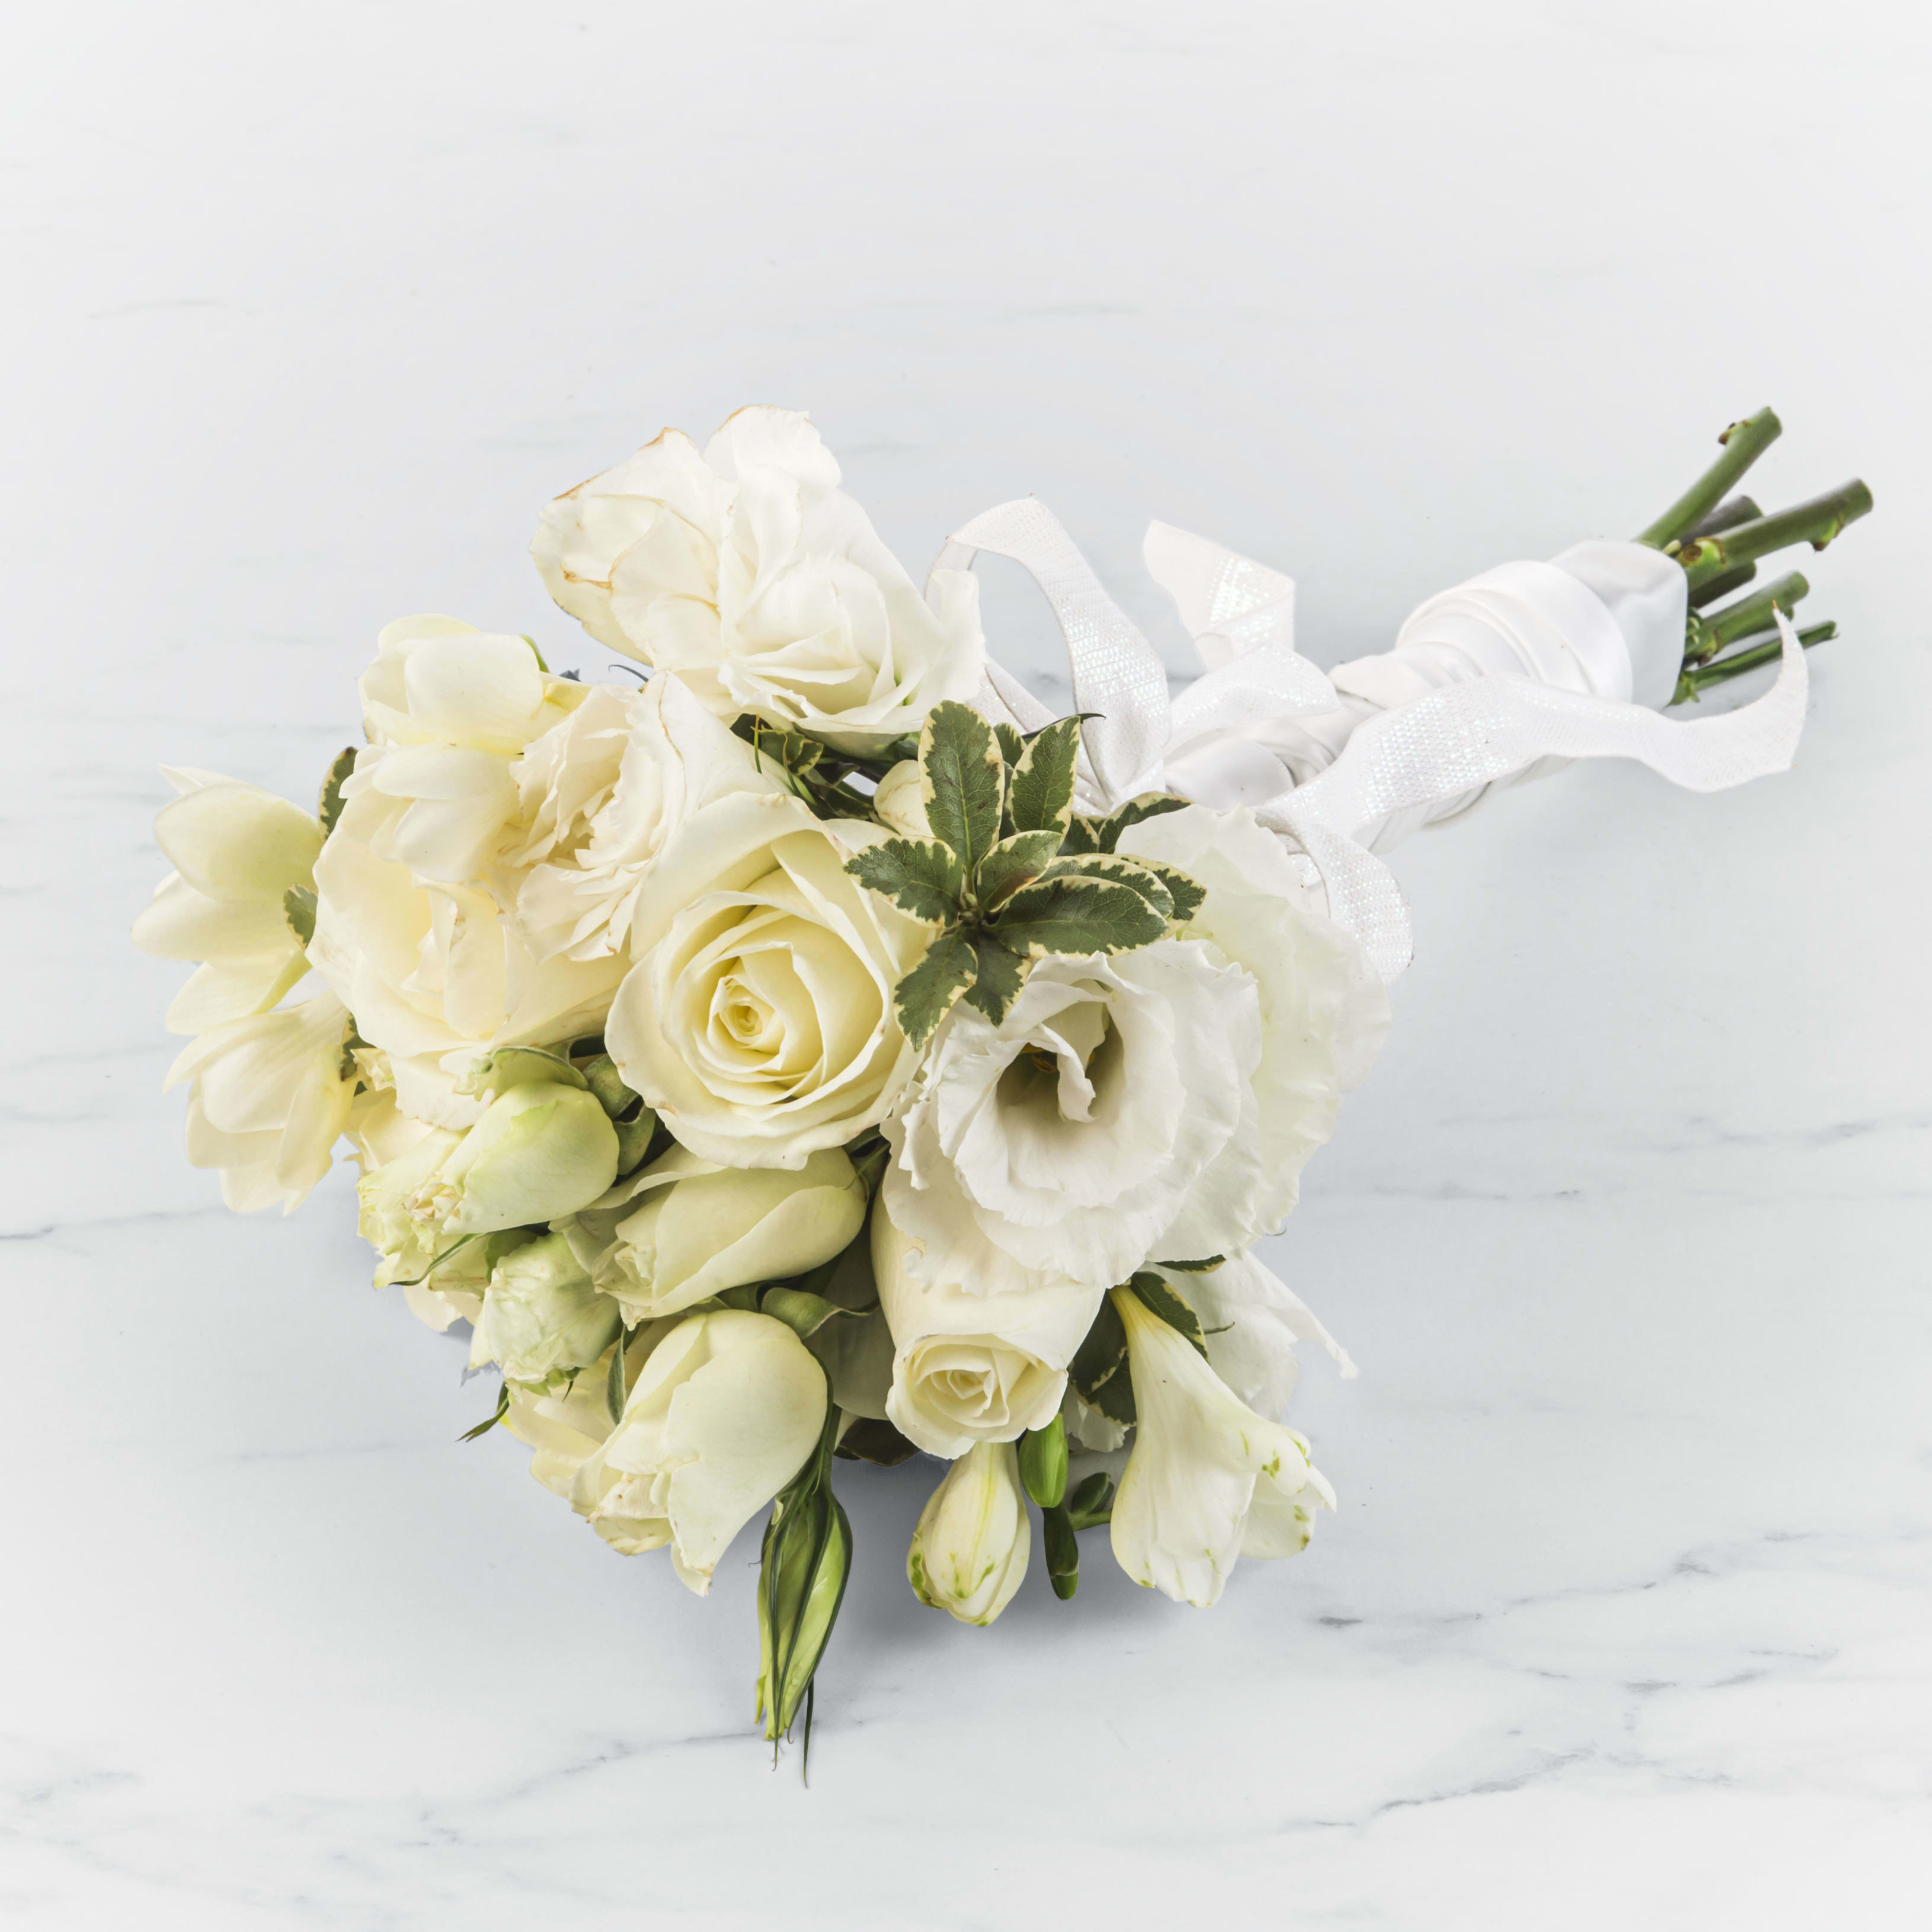 White Rose Bouquet by BloomNation™  - A classic white rose bouquet tied with white satin ribbon. The perfect accessory for any formal event including proms, weddings, and debutante balls.  